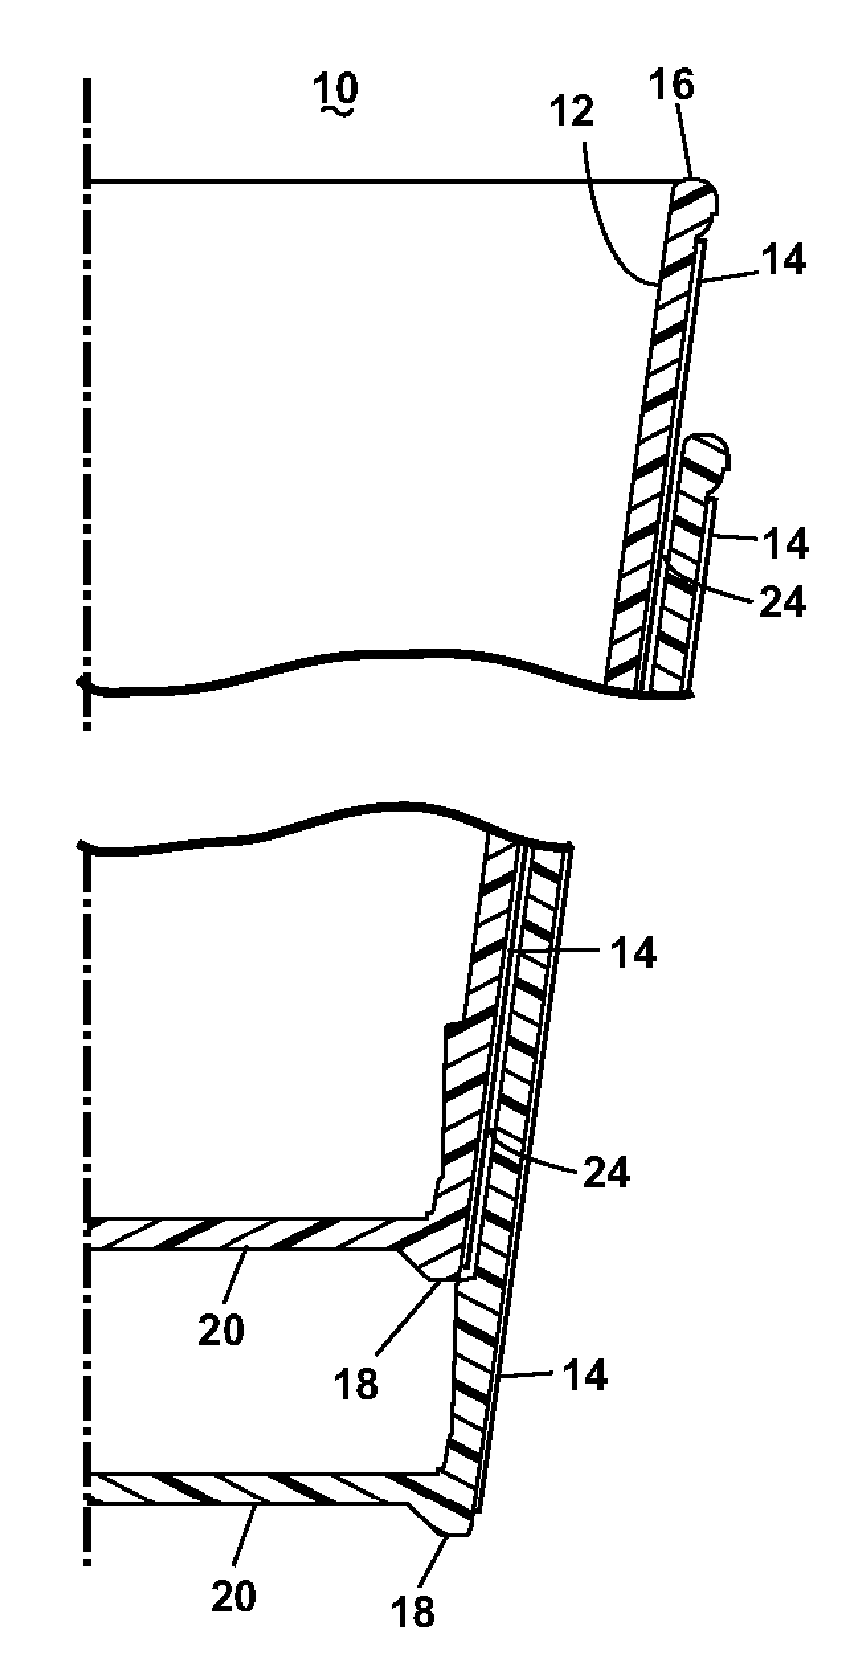 Paper wrapped foam cup and method of assembly